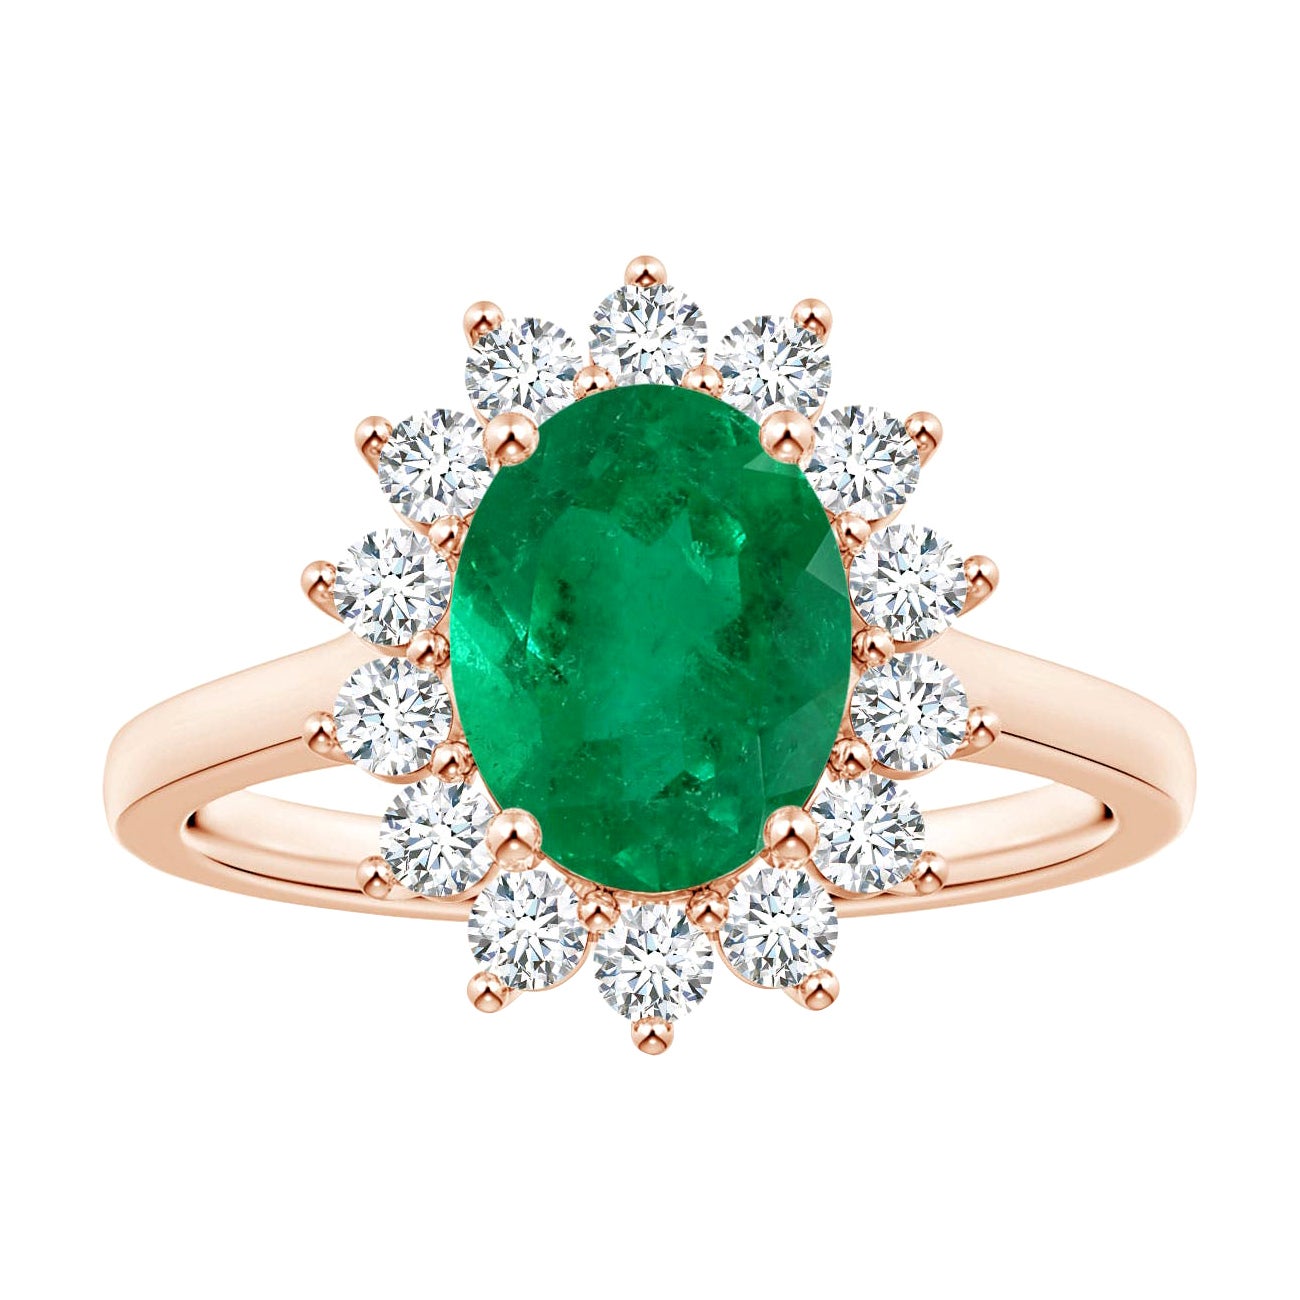 For Sale:  Angara Gia Certified Oval Columbian Emerald Halo Ring in Rose Gold